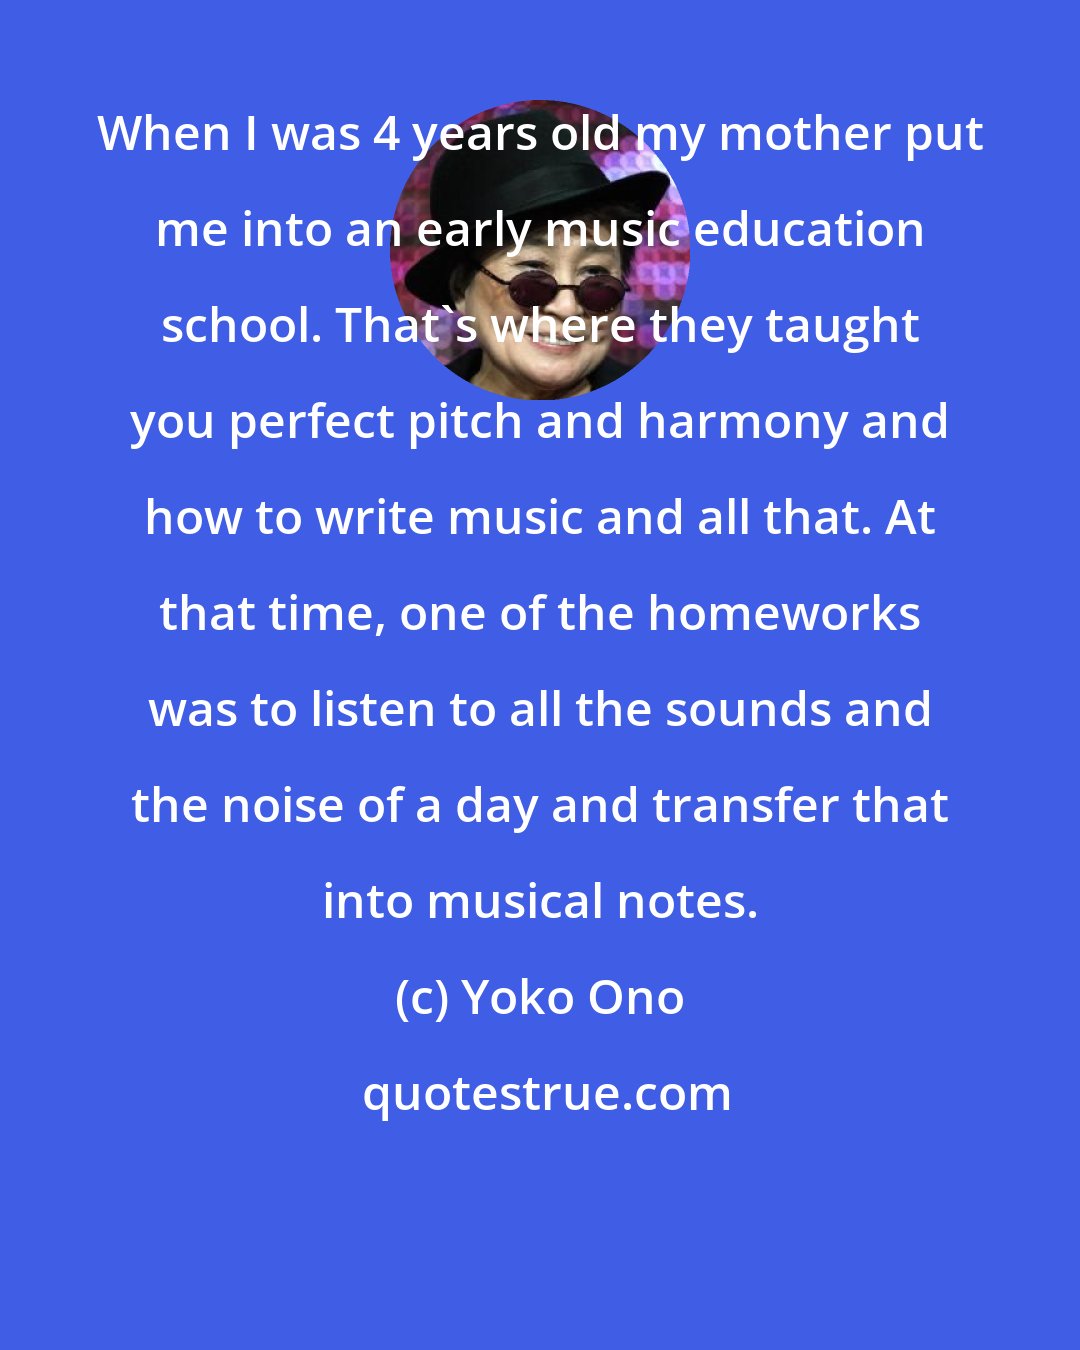 Yoko Ono: When I was 4 years old my mother put me into an early music education school. That's where they taught you perfect pitch and harmony and how to write music and all that. At that time, one of the homeworks was to listen to all the sounds and the noise of a day and transfer that into musical notes.